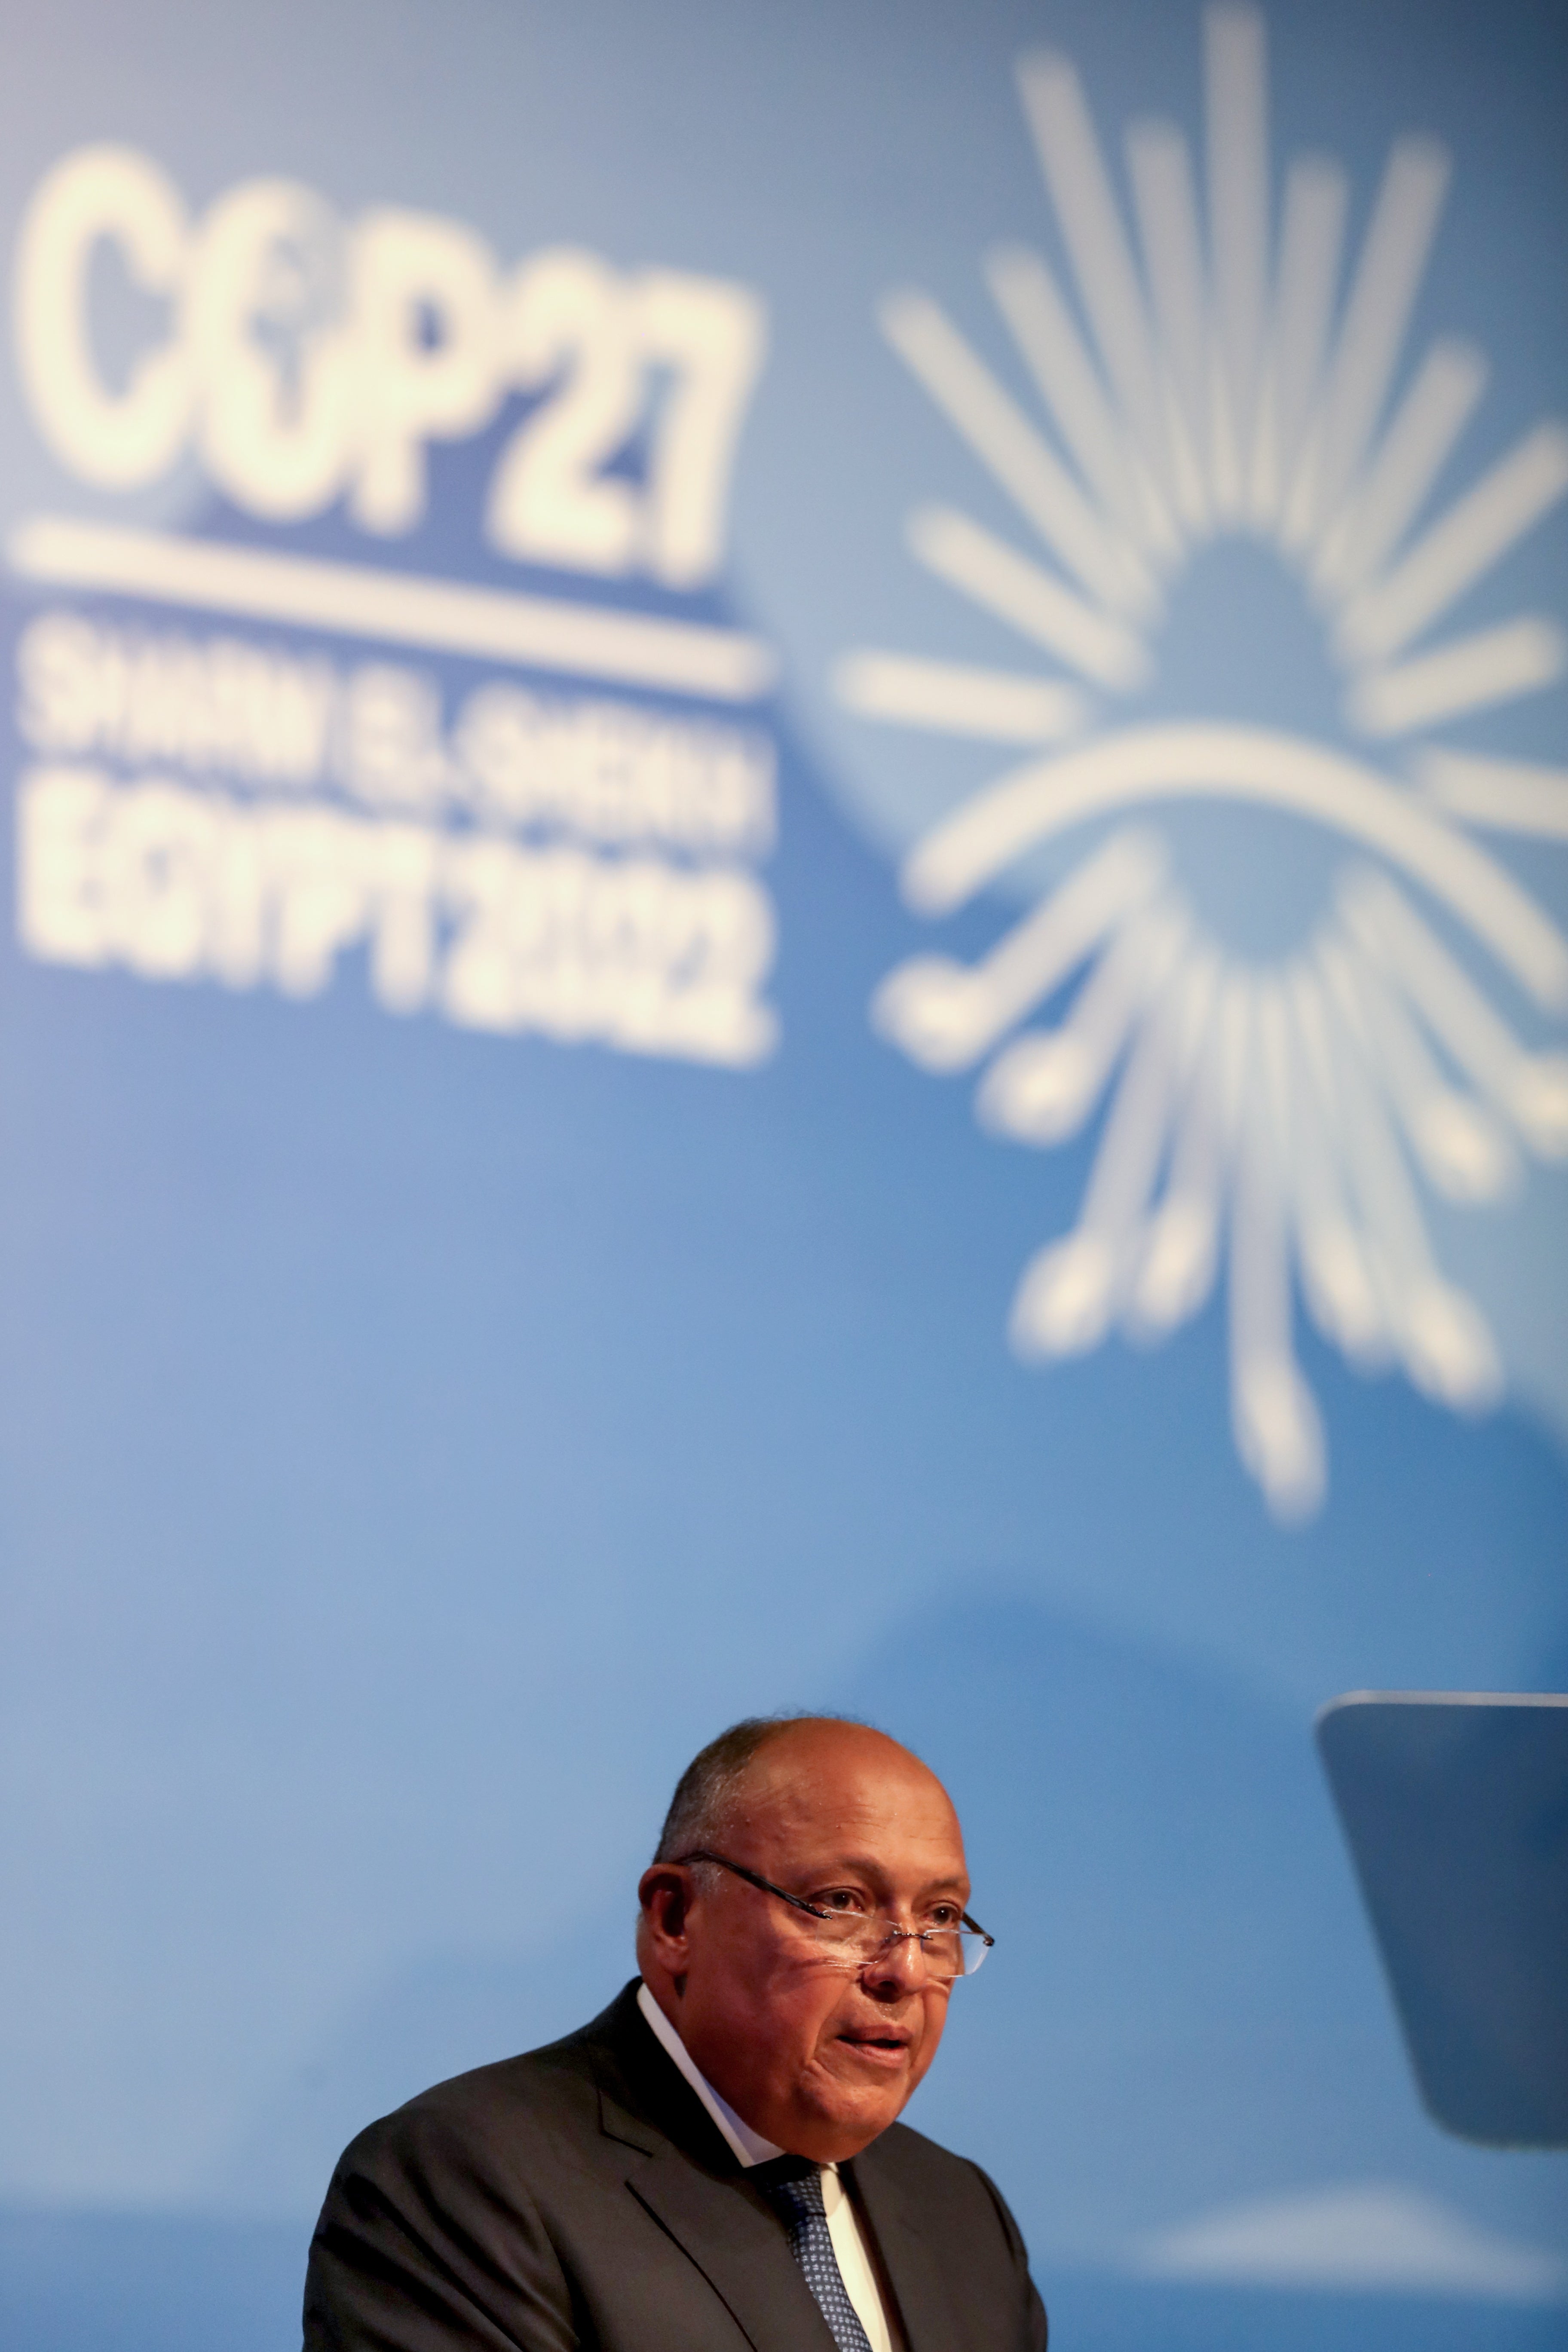 Cop27 president Sameh Shoukry at the opening of the summit on Sunday